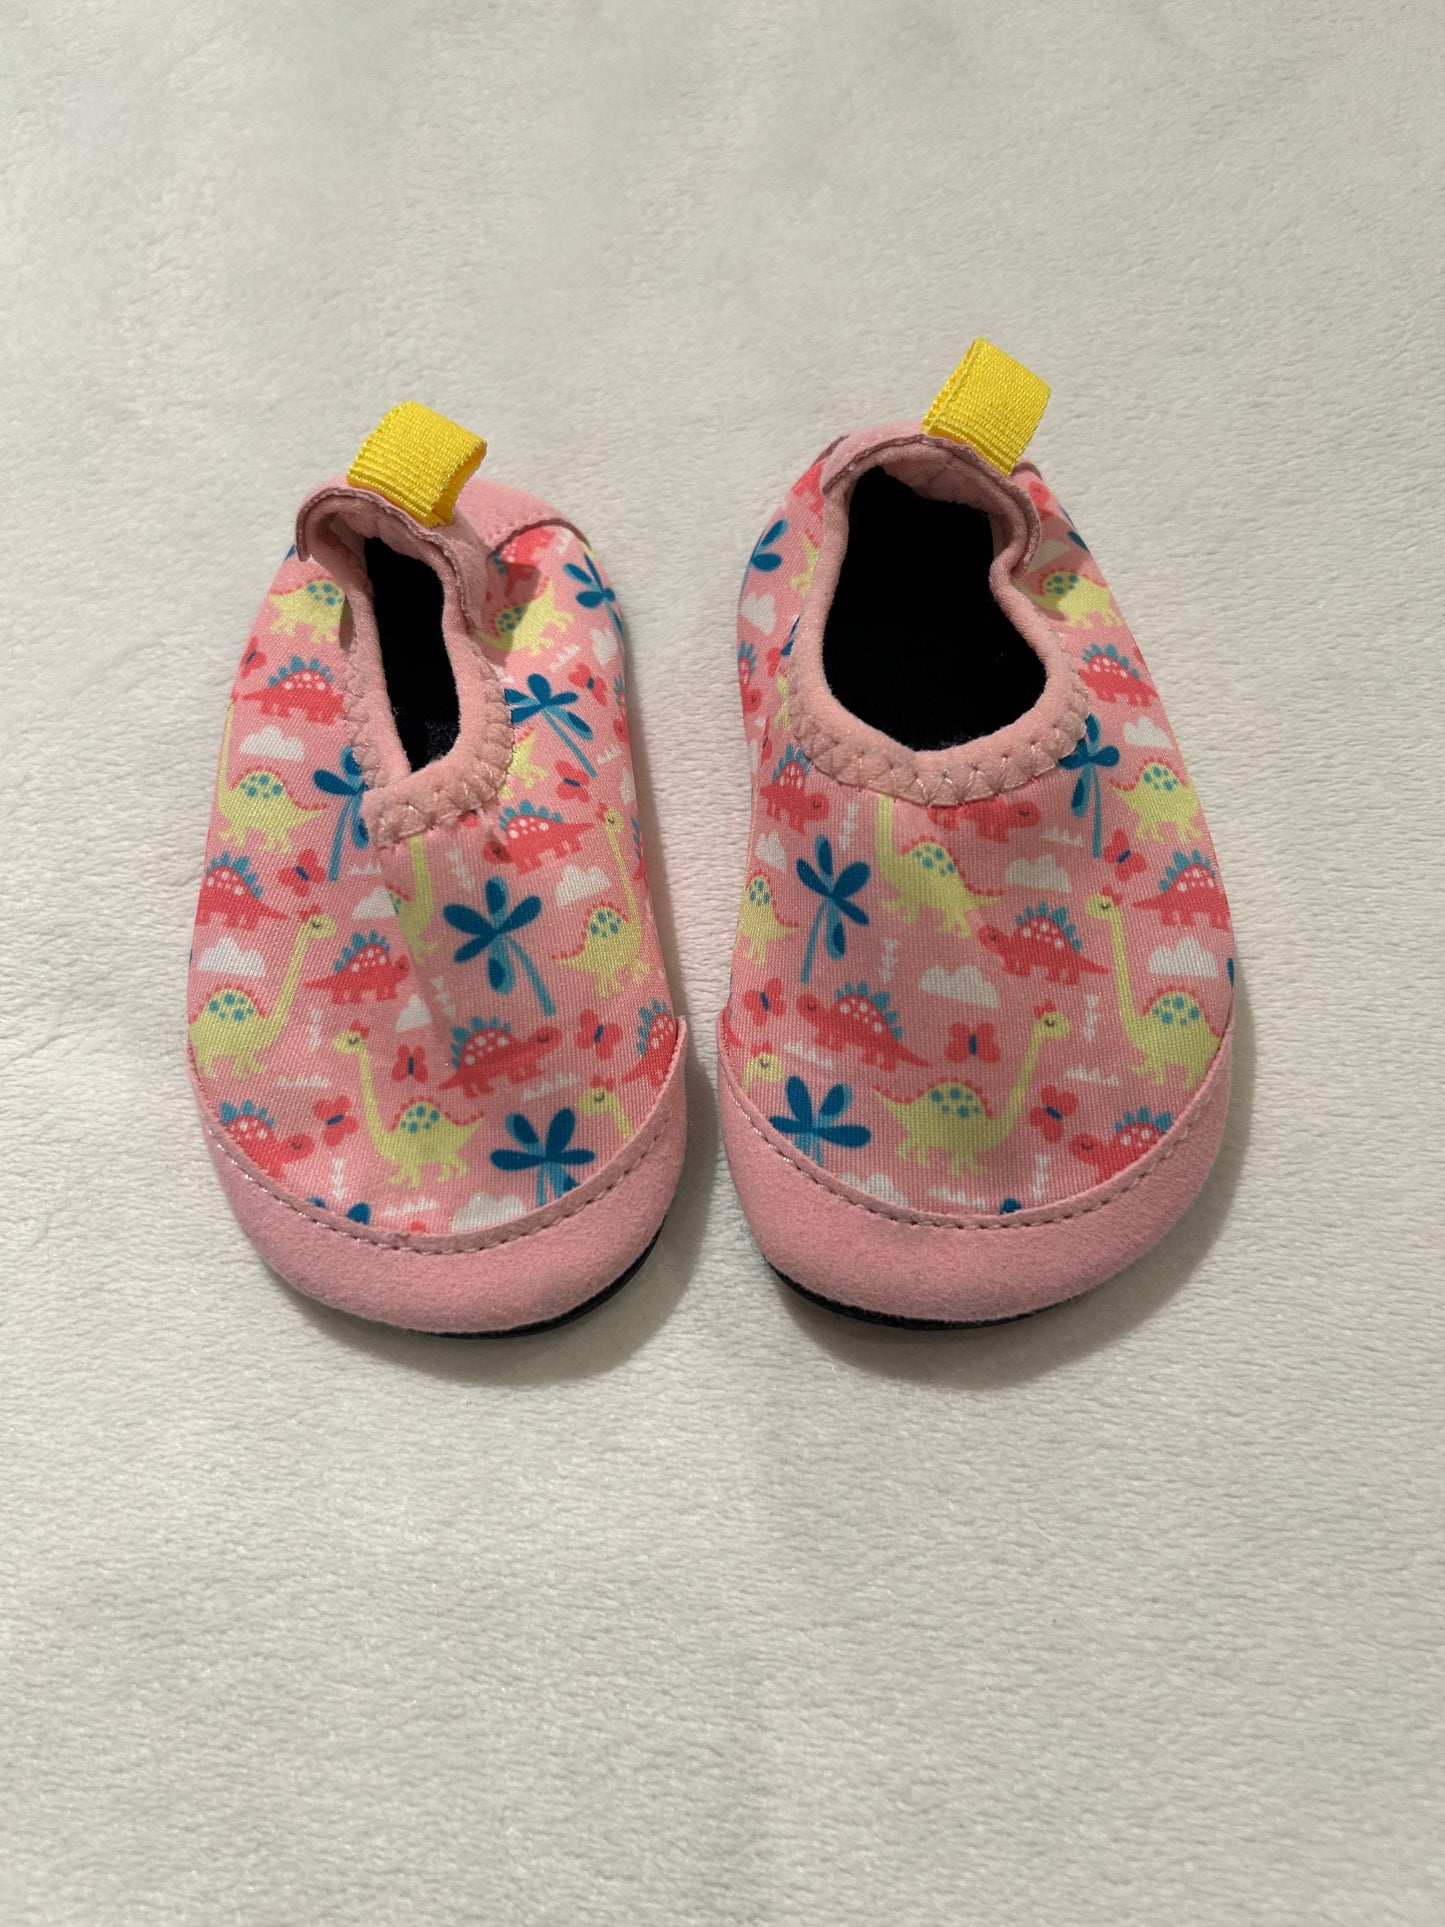 12-18 month girl water shoes EUC